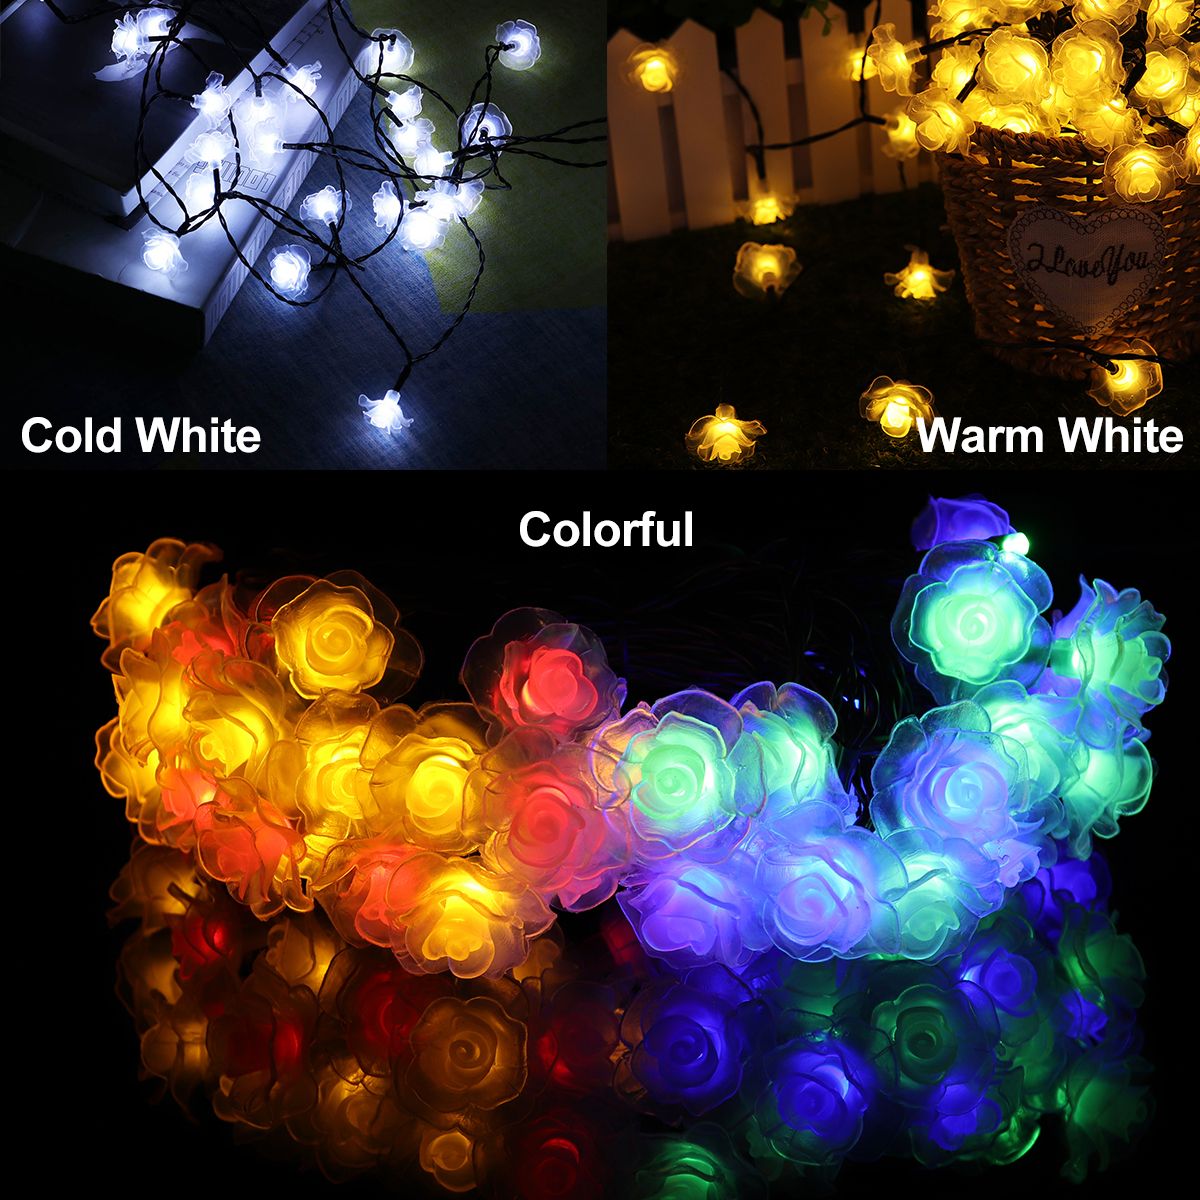 111222M-Solar-LED-String-Lights-Waterproof-Christmas-Party-Garden-Home-Decor-1764133